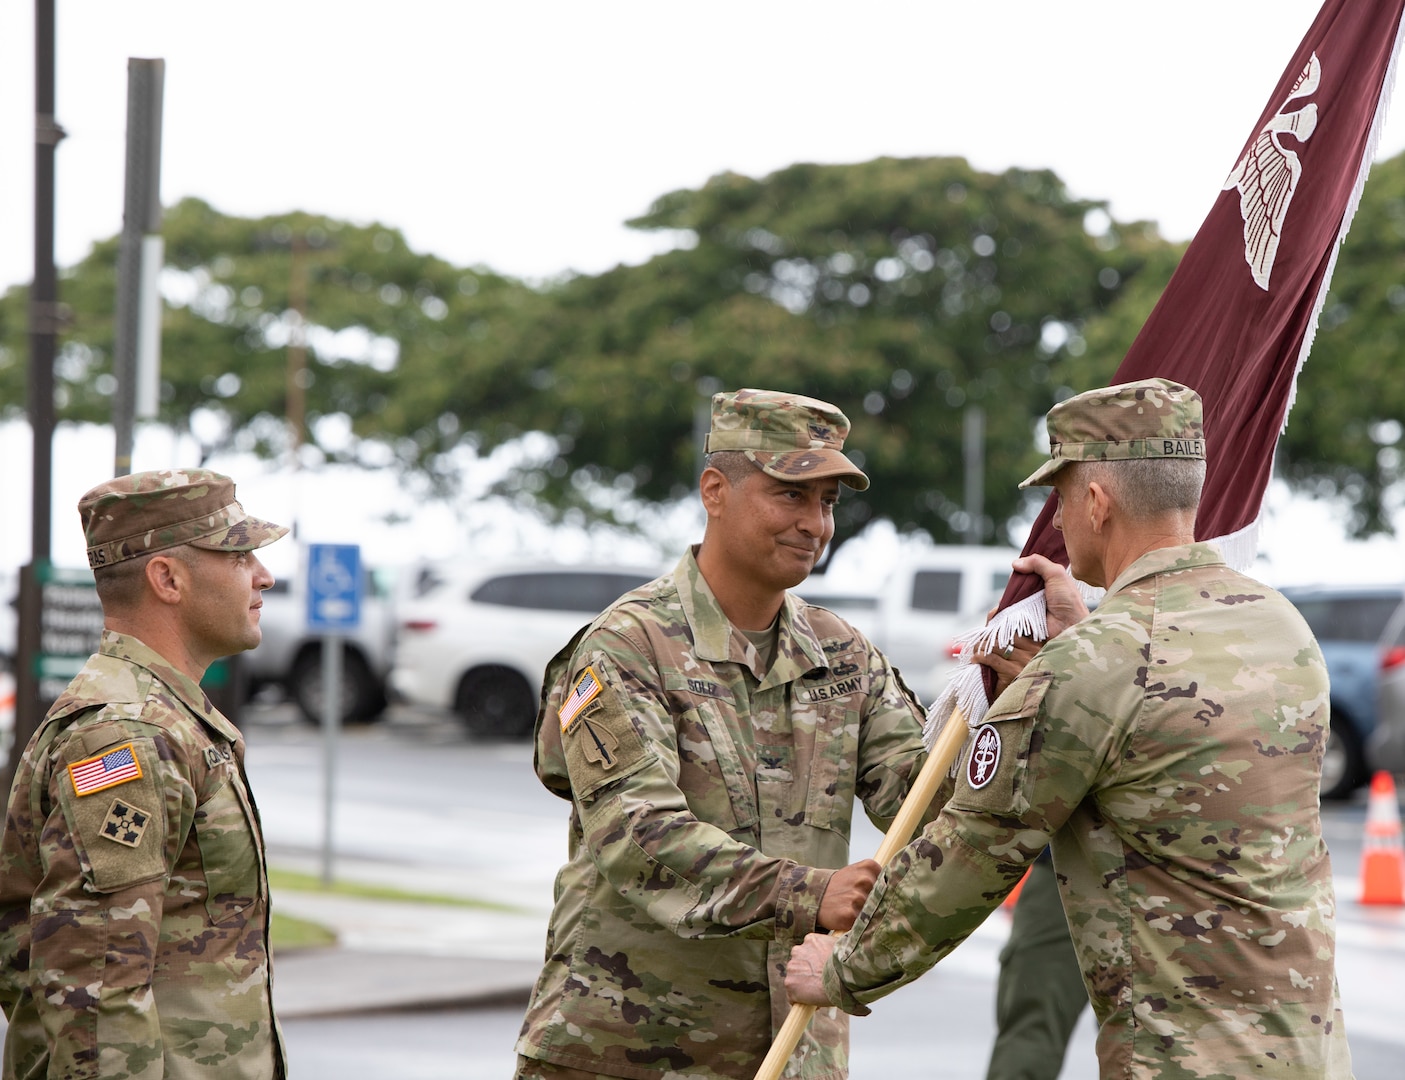 Col. Bill A. Soliz relinquished command of Tripler Army Medical Center during a ceremony at the hospital in Honolulu, Hawaii on May 19, 2023. Brig. Gen. Edward H. Bailey, Medical Readiness Command, Pacific commander, presided over the ceremony.